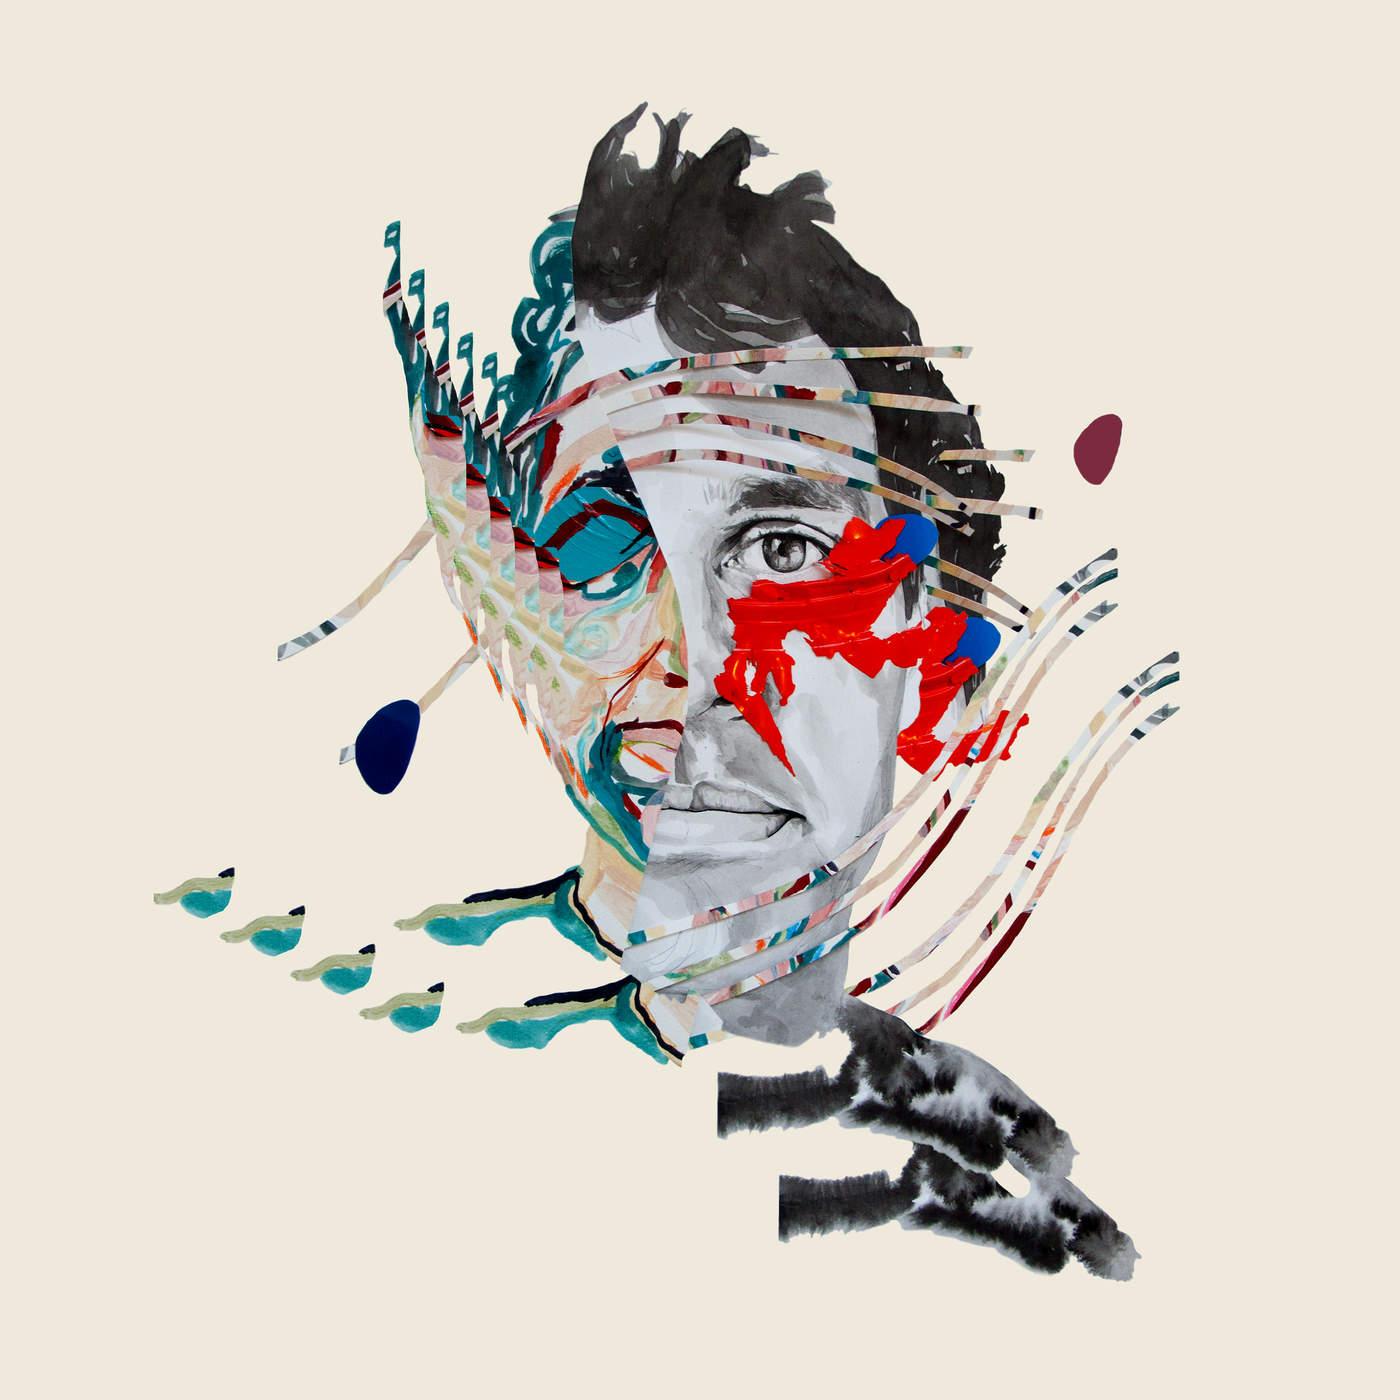 Album Review: “Painting With” by Animal Collective